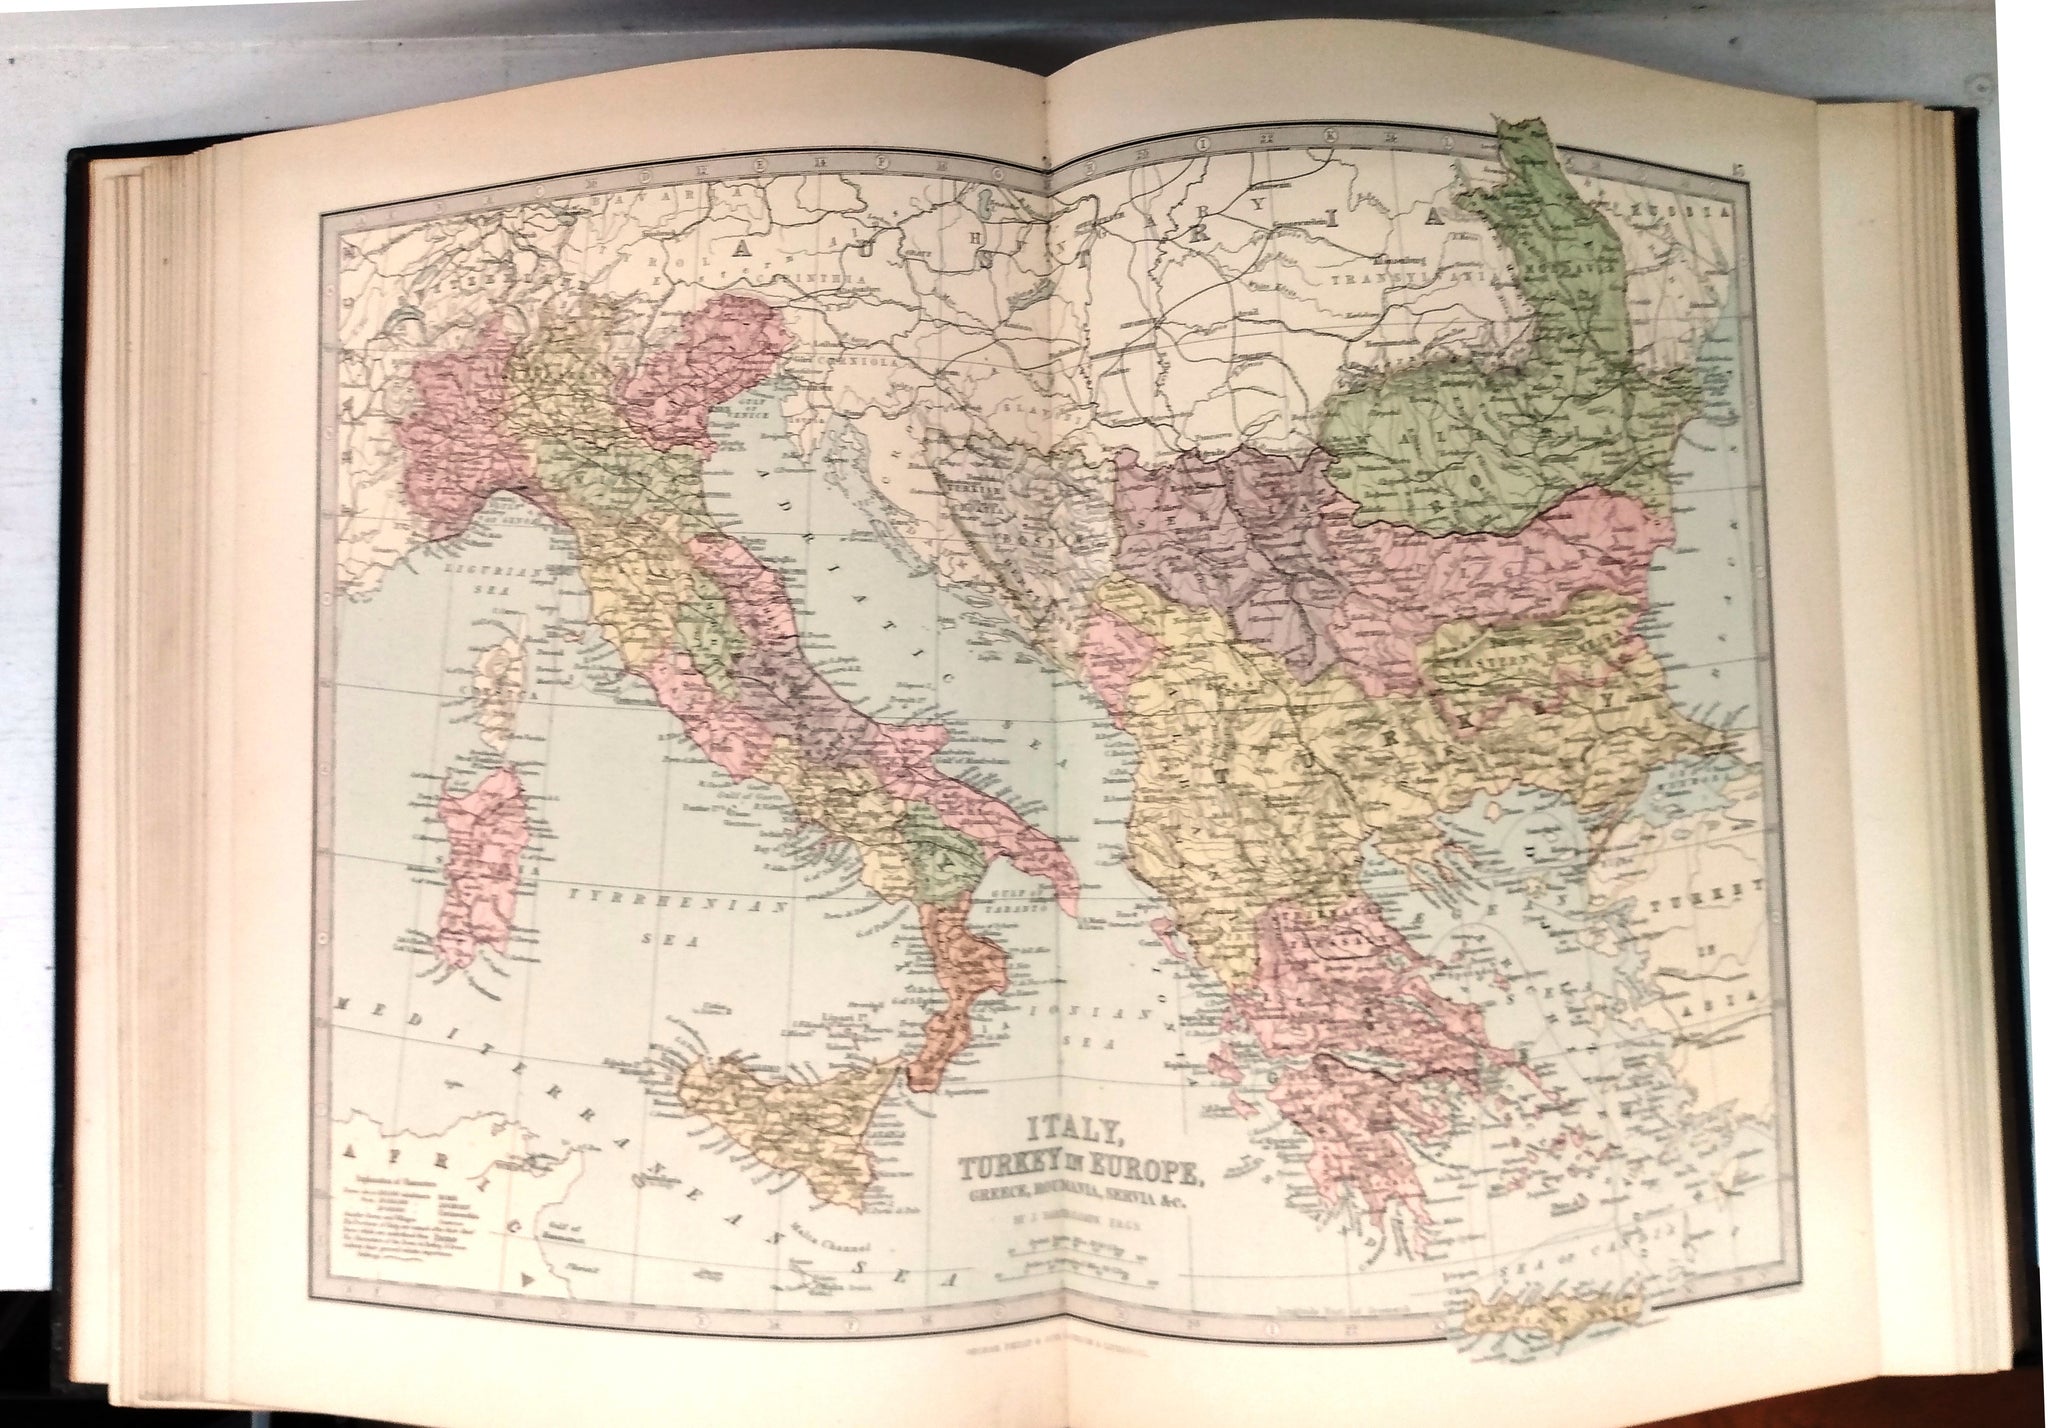 Philips' Popular Atlas of the World: A Series of Maps Showing the 